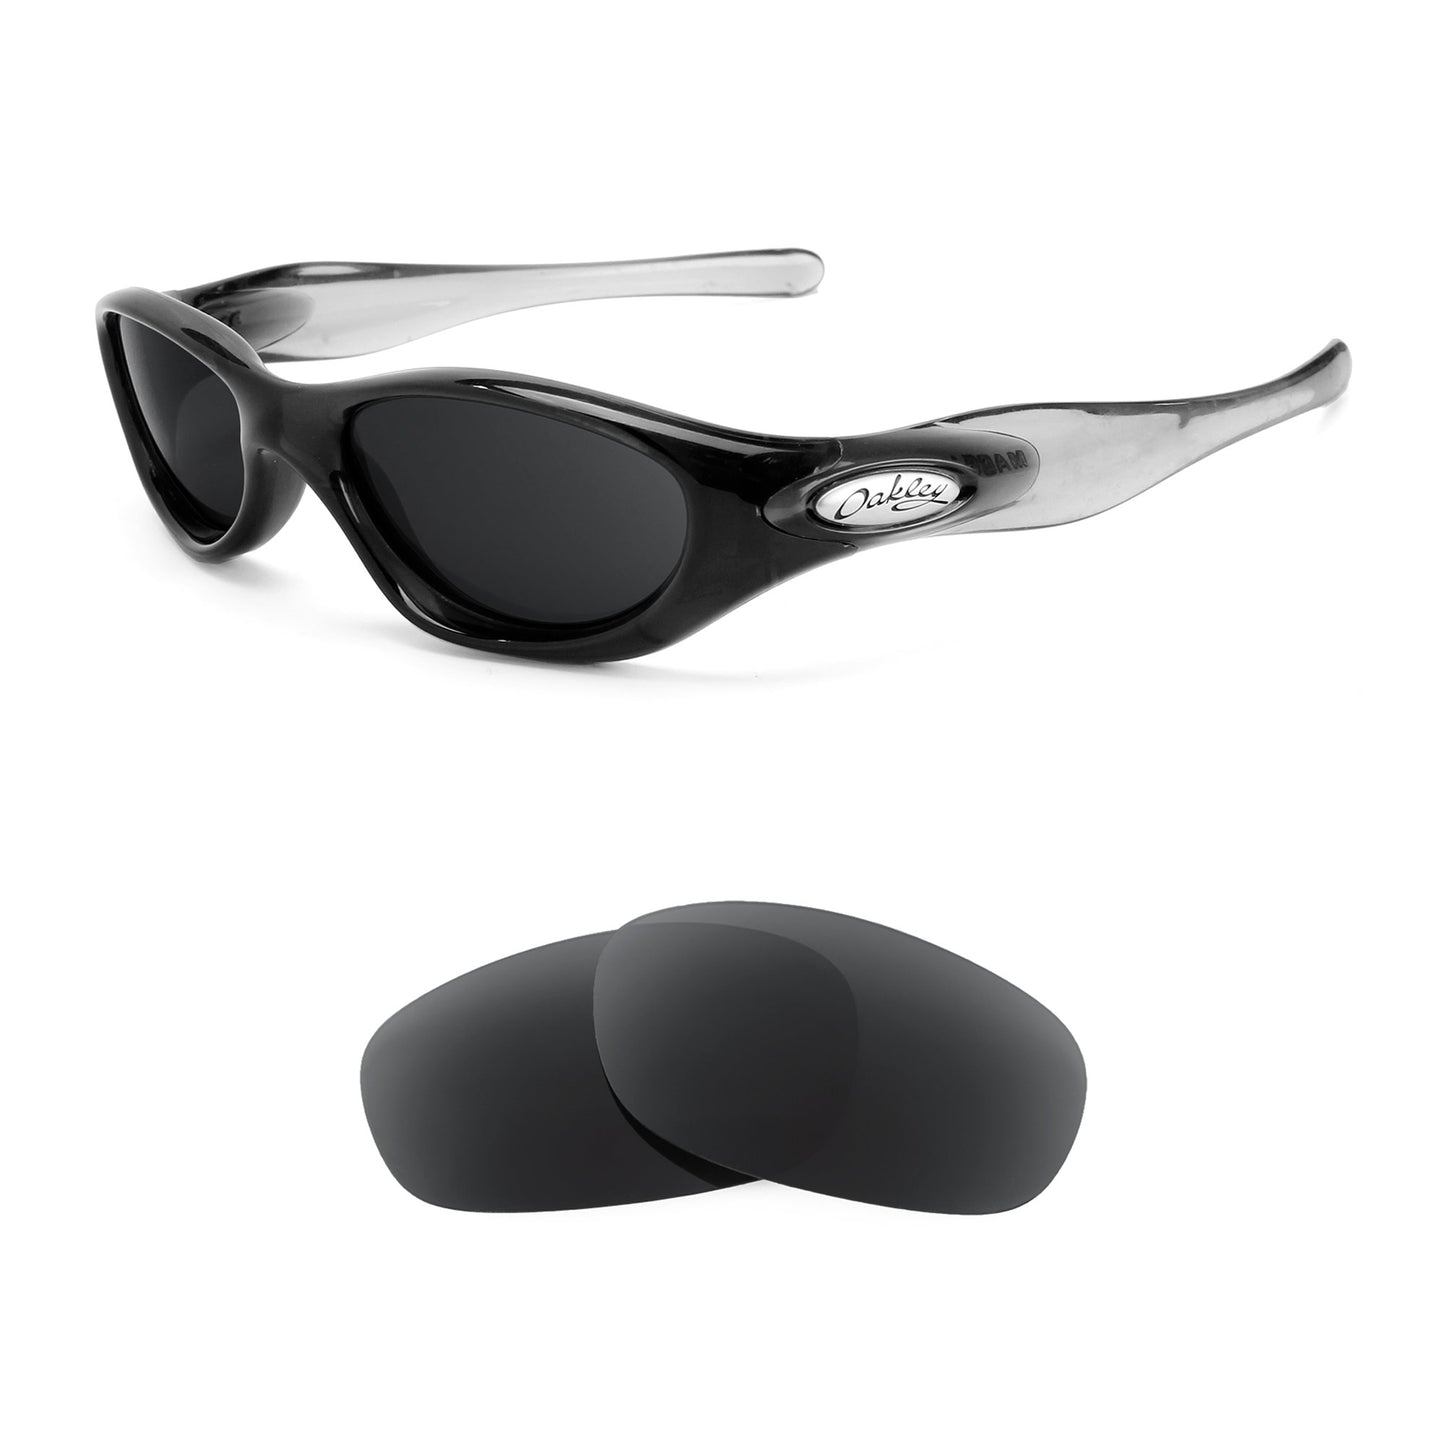 Oakley Pocket sunglasses with replacement lenses